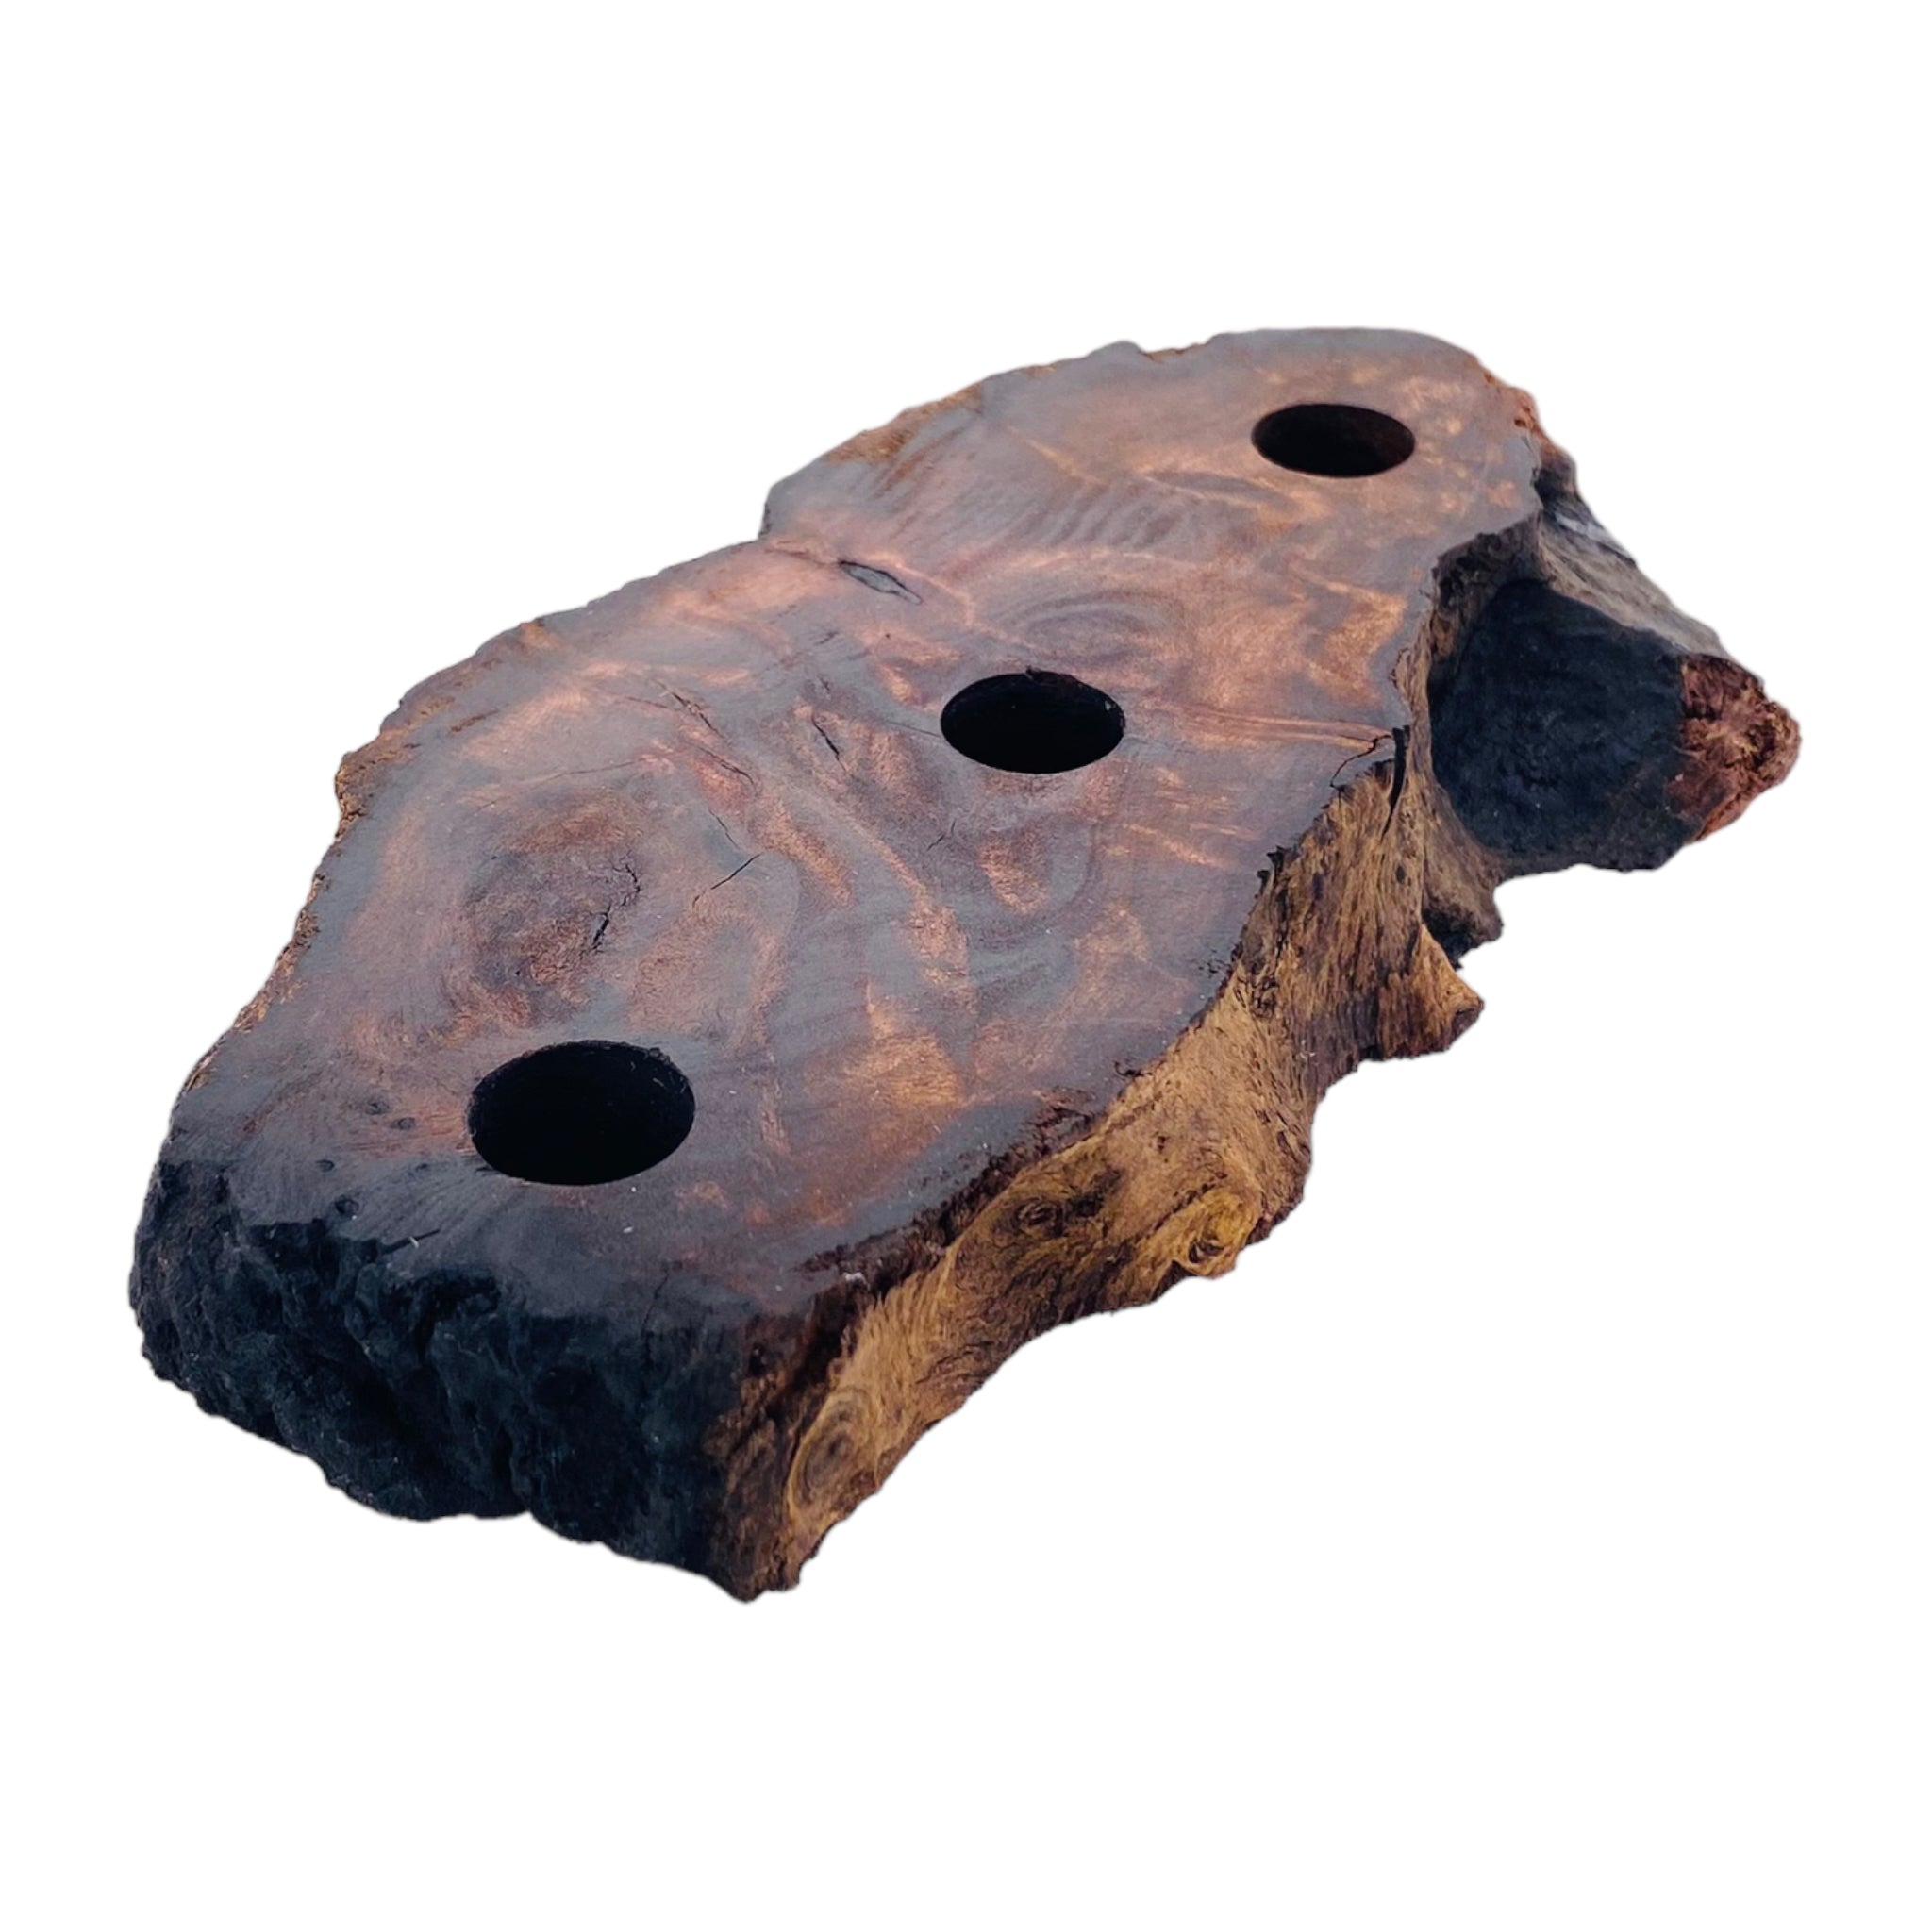 3 Hole Wood Display Stand Holder For 14mm Bong Bowl Pieces Or Quartz Bangers - Red Wood Burl With Live Edge #2